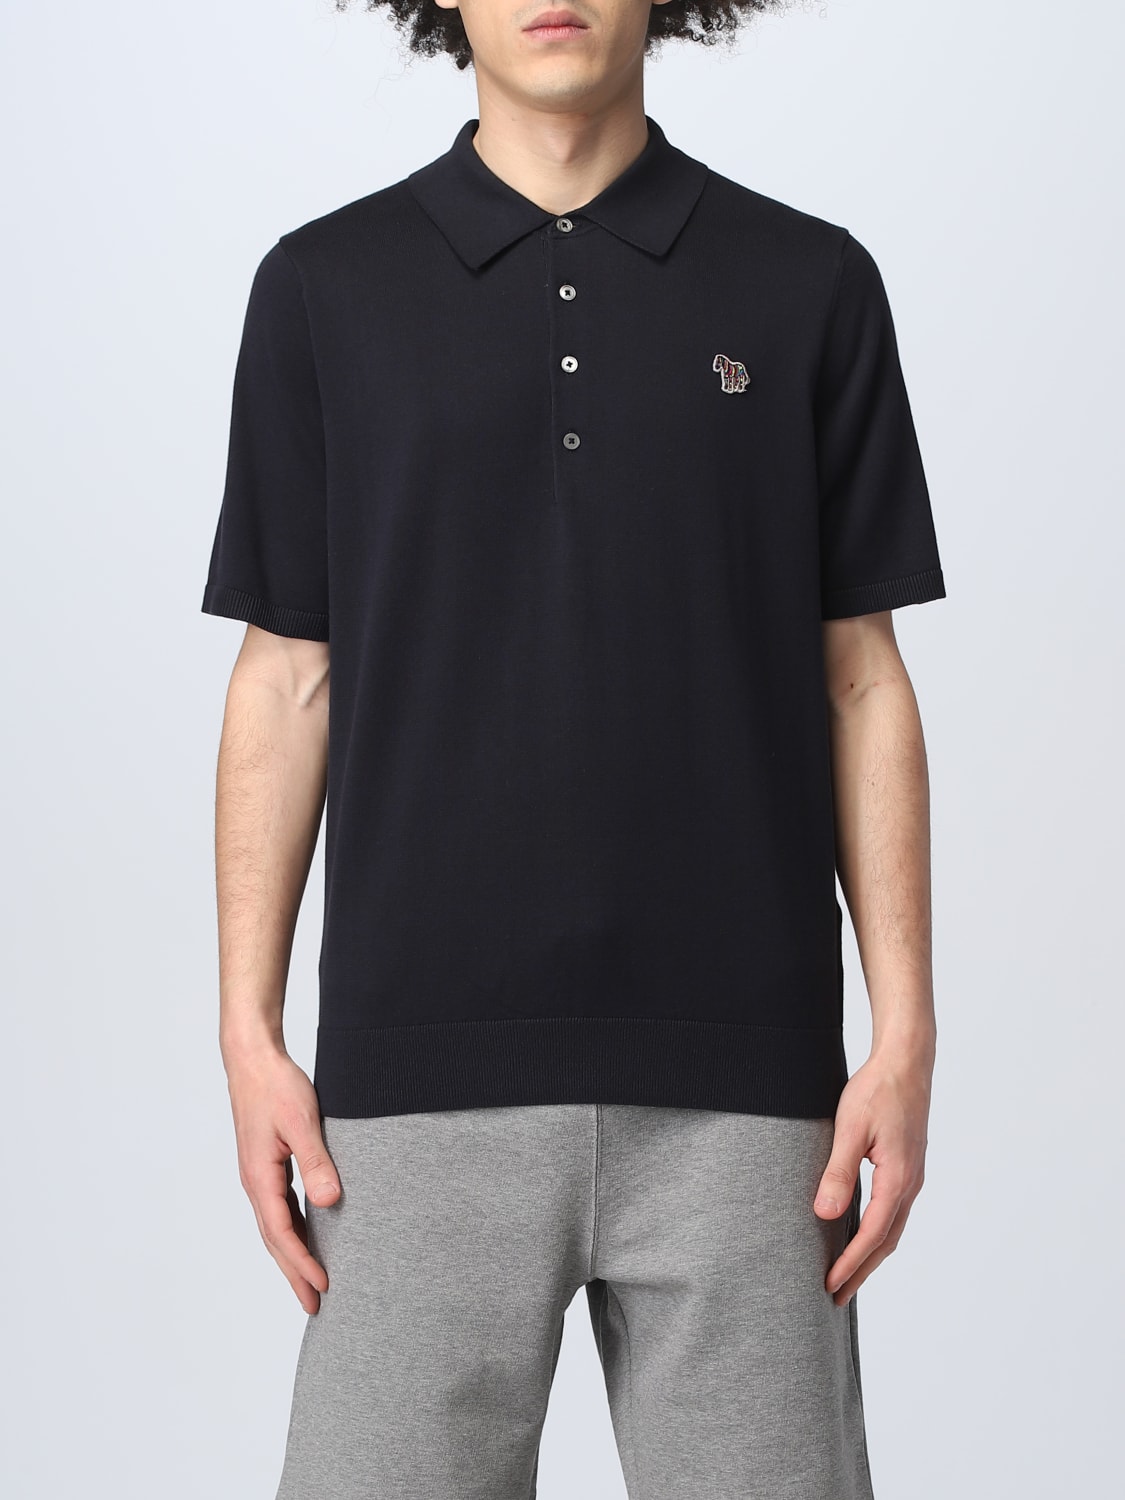 PAUL polo shirt for man - Blue | Paul Smith polo shirt M2R504XZK21745 online at GIGLIO.COM